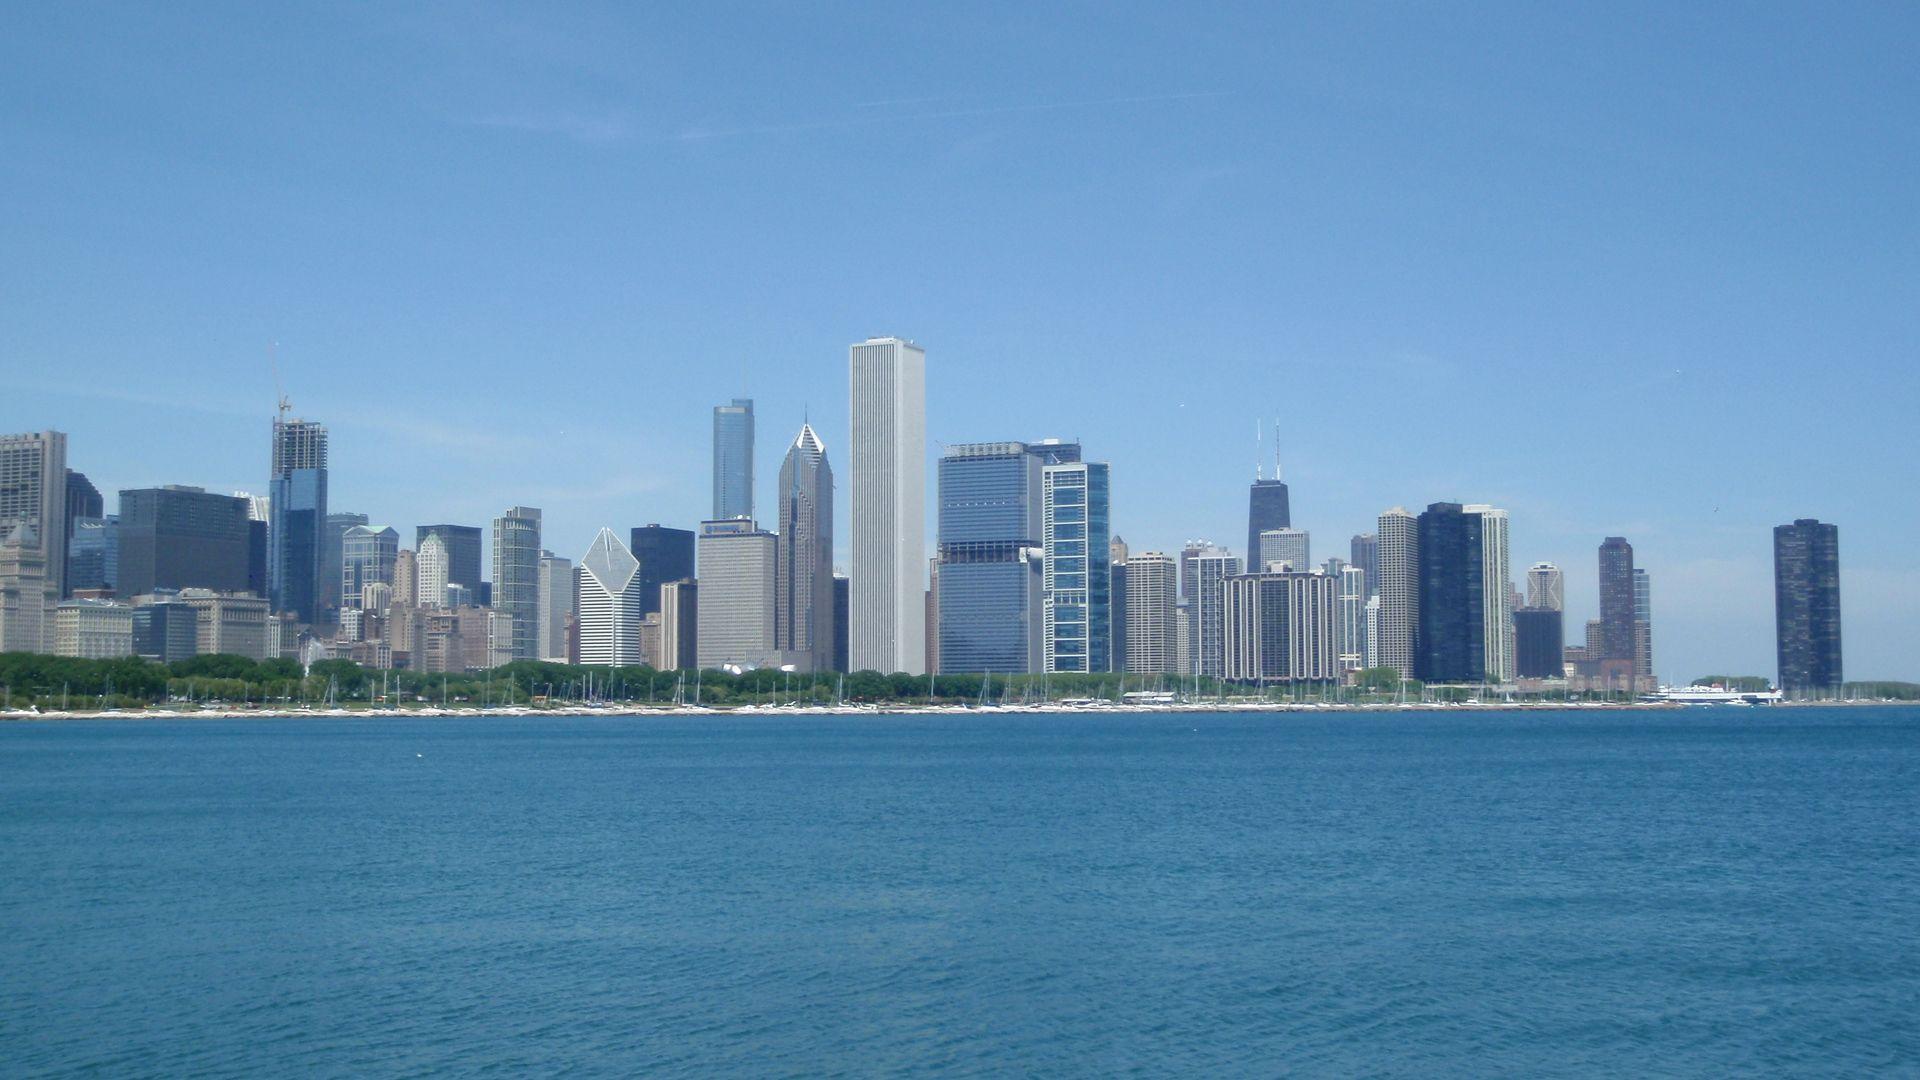 Chicago City beach for computer background free